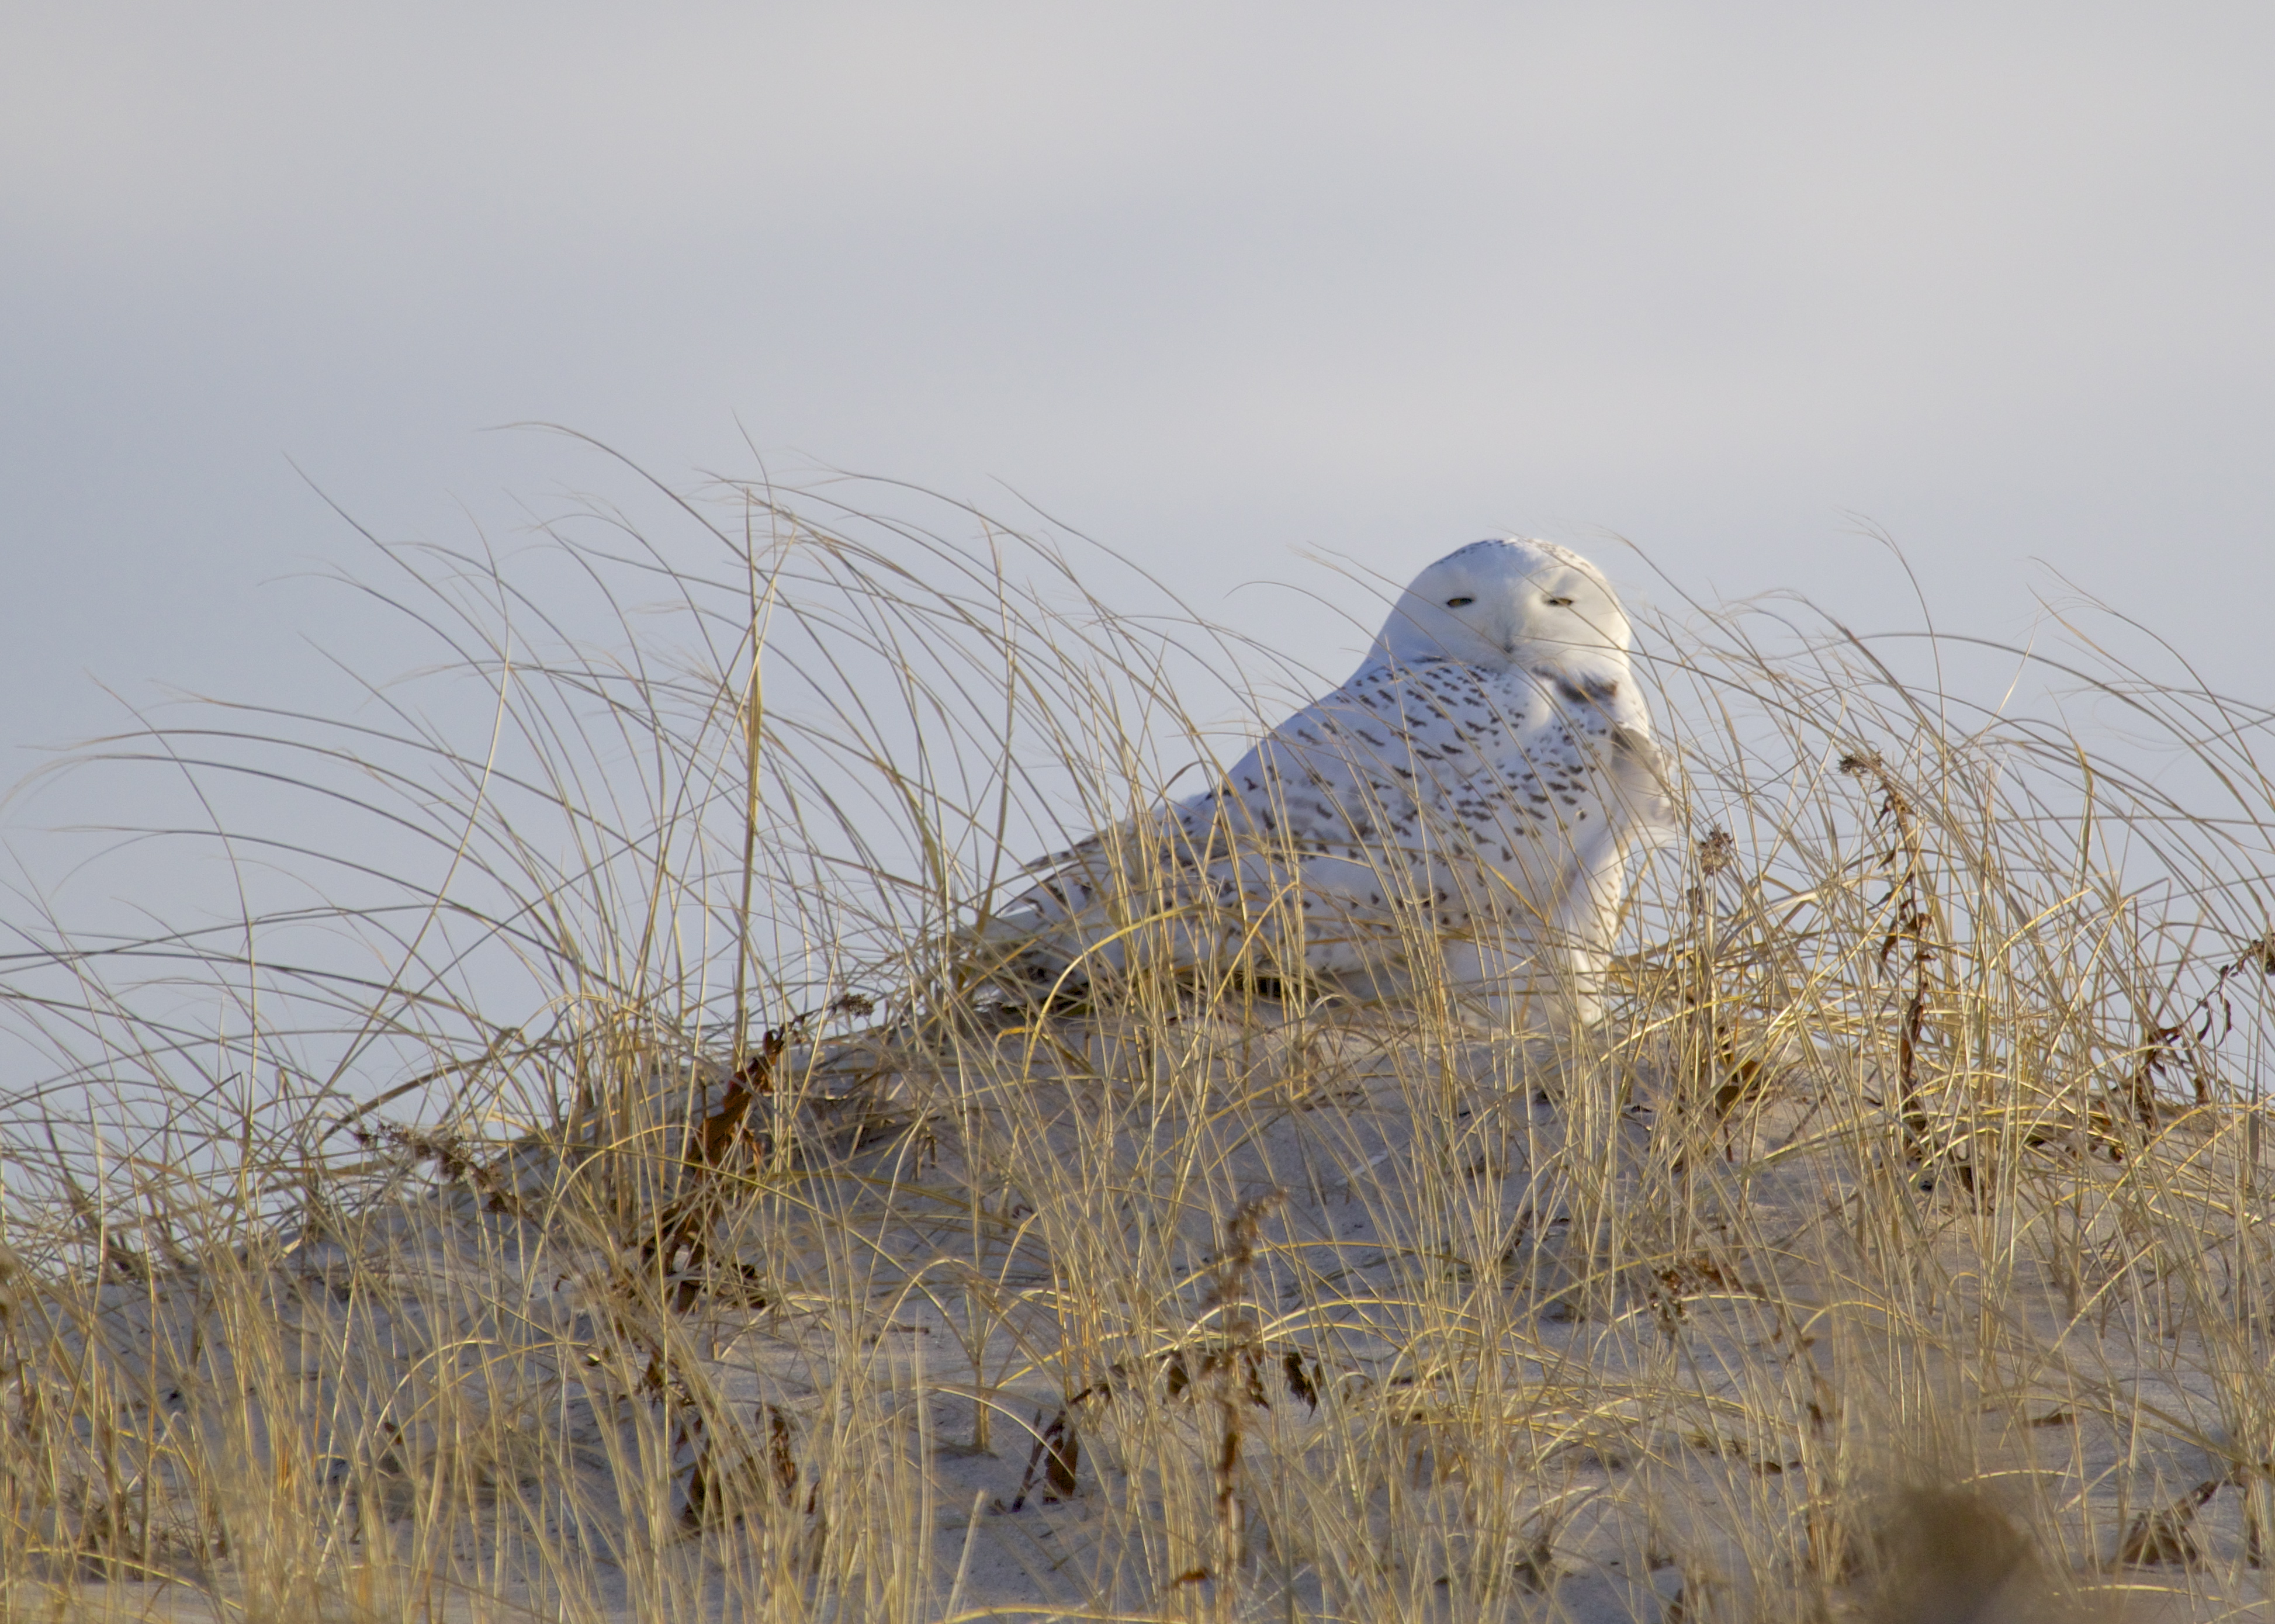 One of two Snowy Owls seen from Dune Road, Suffolk County NY on 12/26/13. 